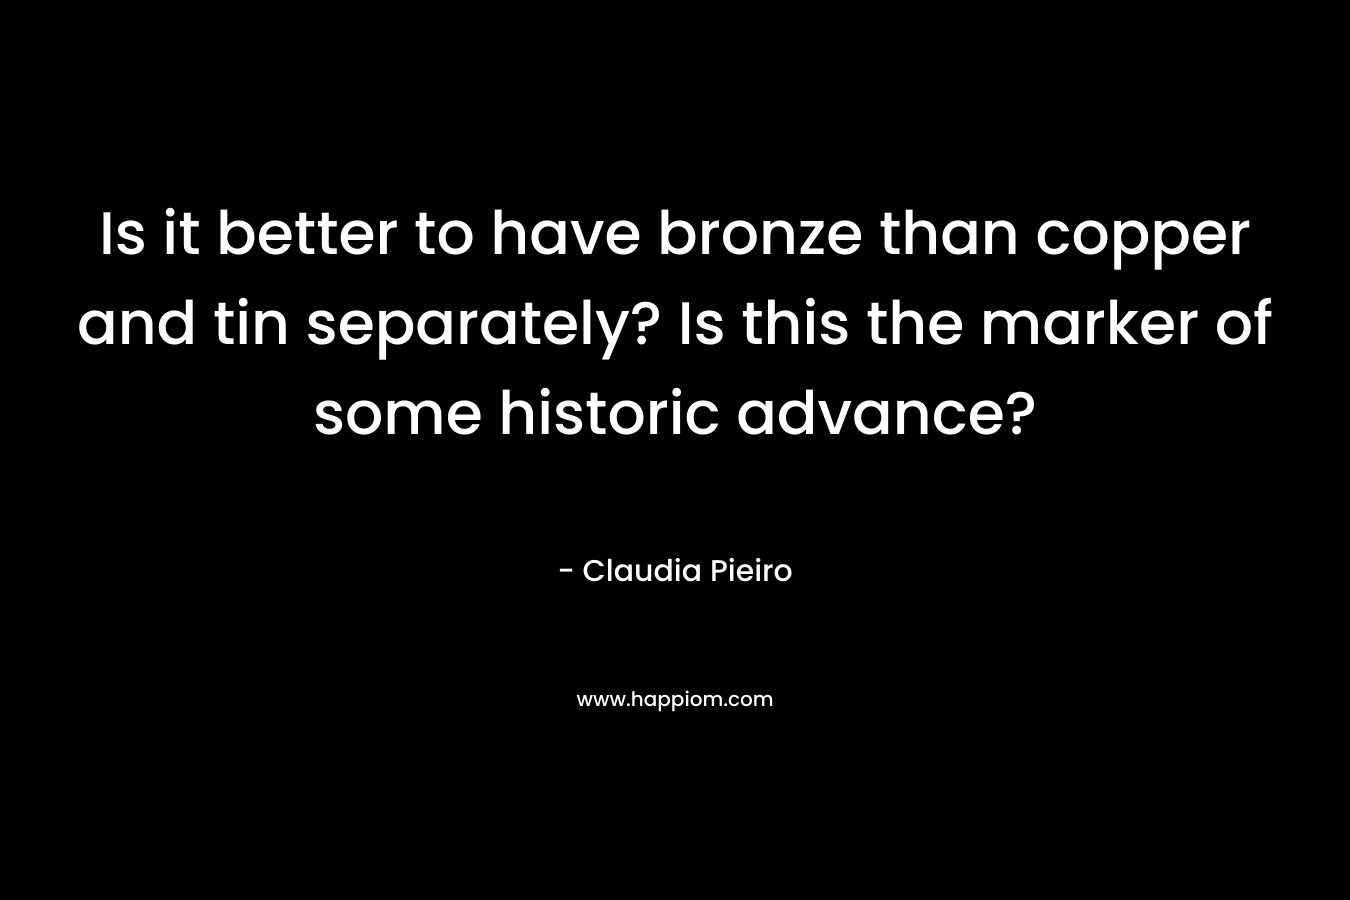 Is it better to have bronze than copper and tin separately? Is this the marker of some historic advance? – Claudia Pieiro